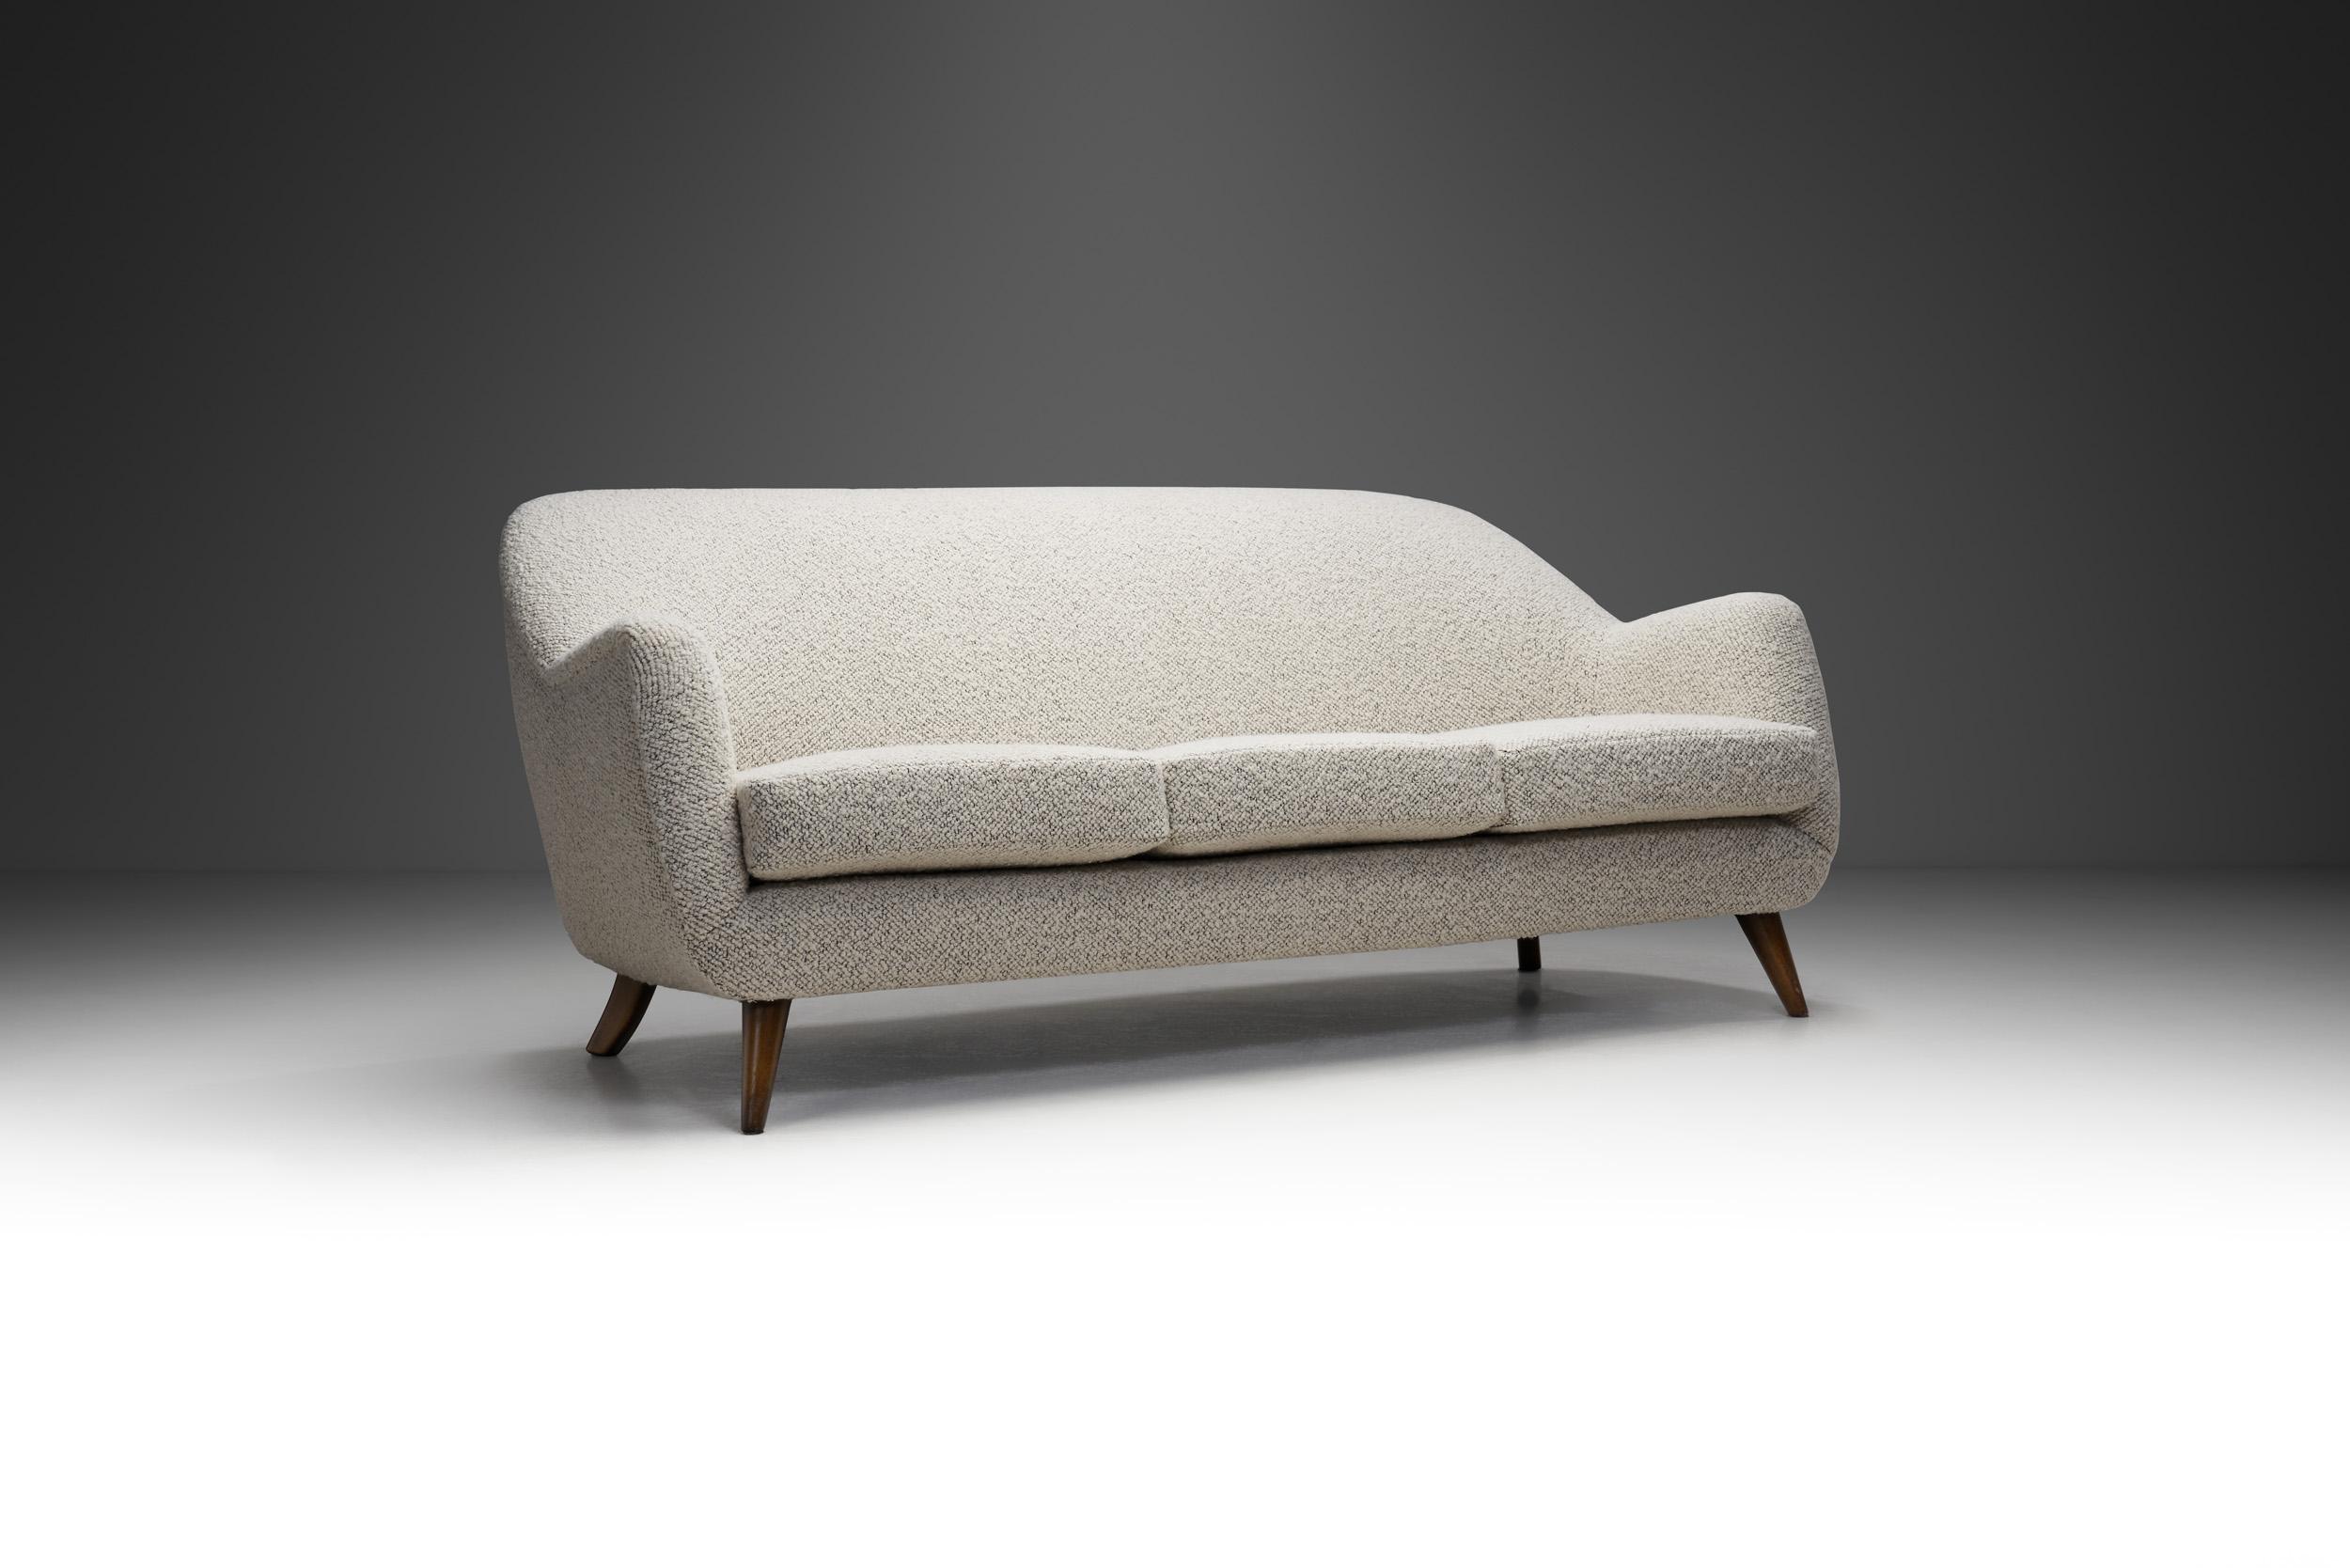 Mid-century design is typically characterized by clean, simple lines and honest use of quality materials. It also generally includes minimal, tasteful use of decorative embellishments. This sofa is a lovely example from this design period.

The